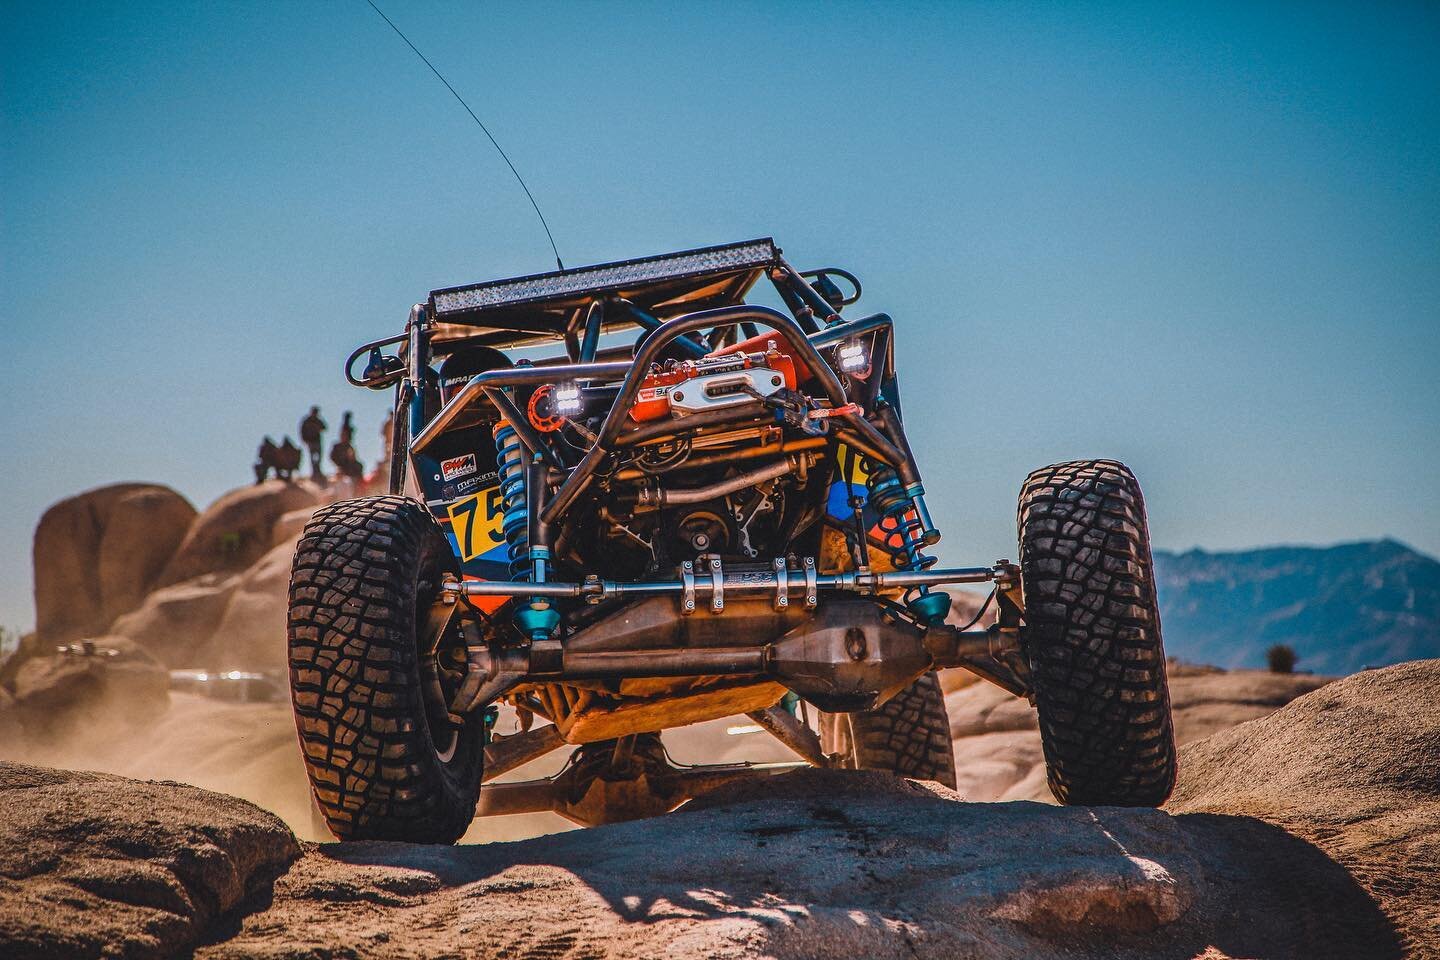 KOH 21&rsquo; in the books. Stoked for next year already! Great damn job to the @ultra4racing team for successfully throwing this event and all the teams/ racers involved. See you in 2022 🏁 
📸 @pnwyota_94